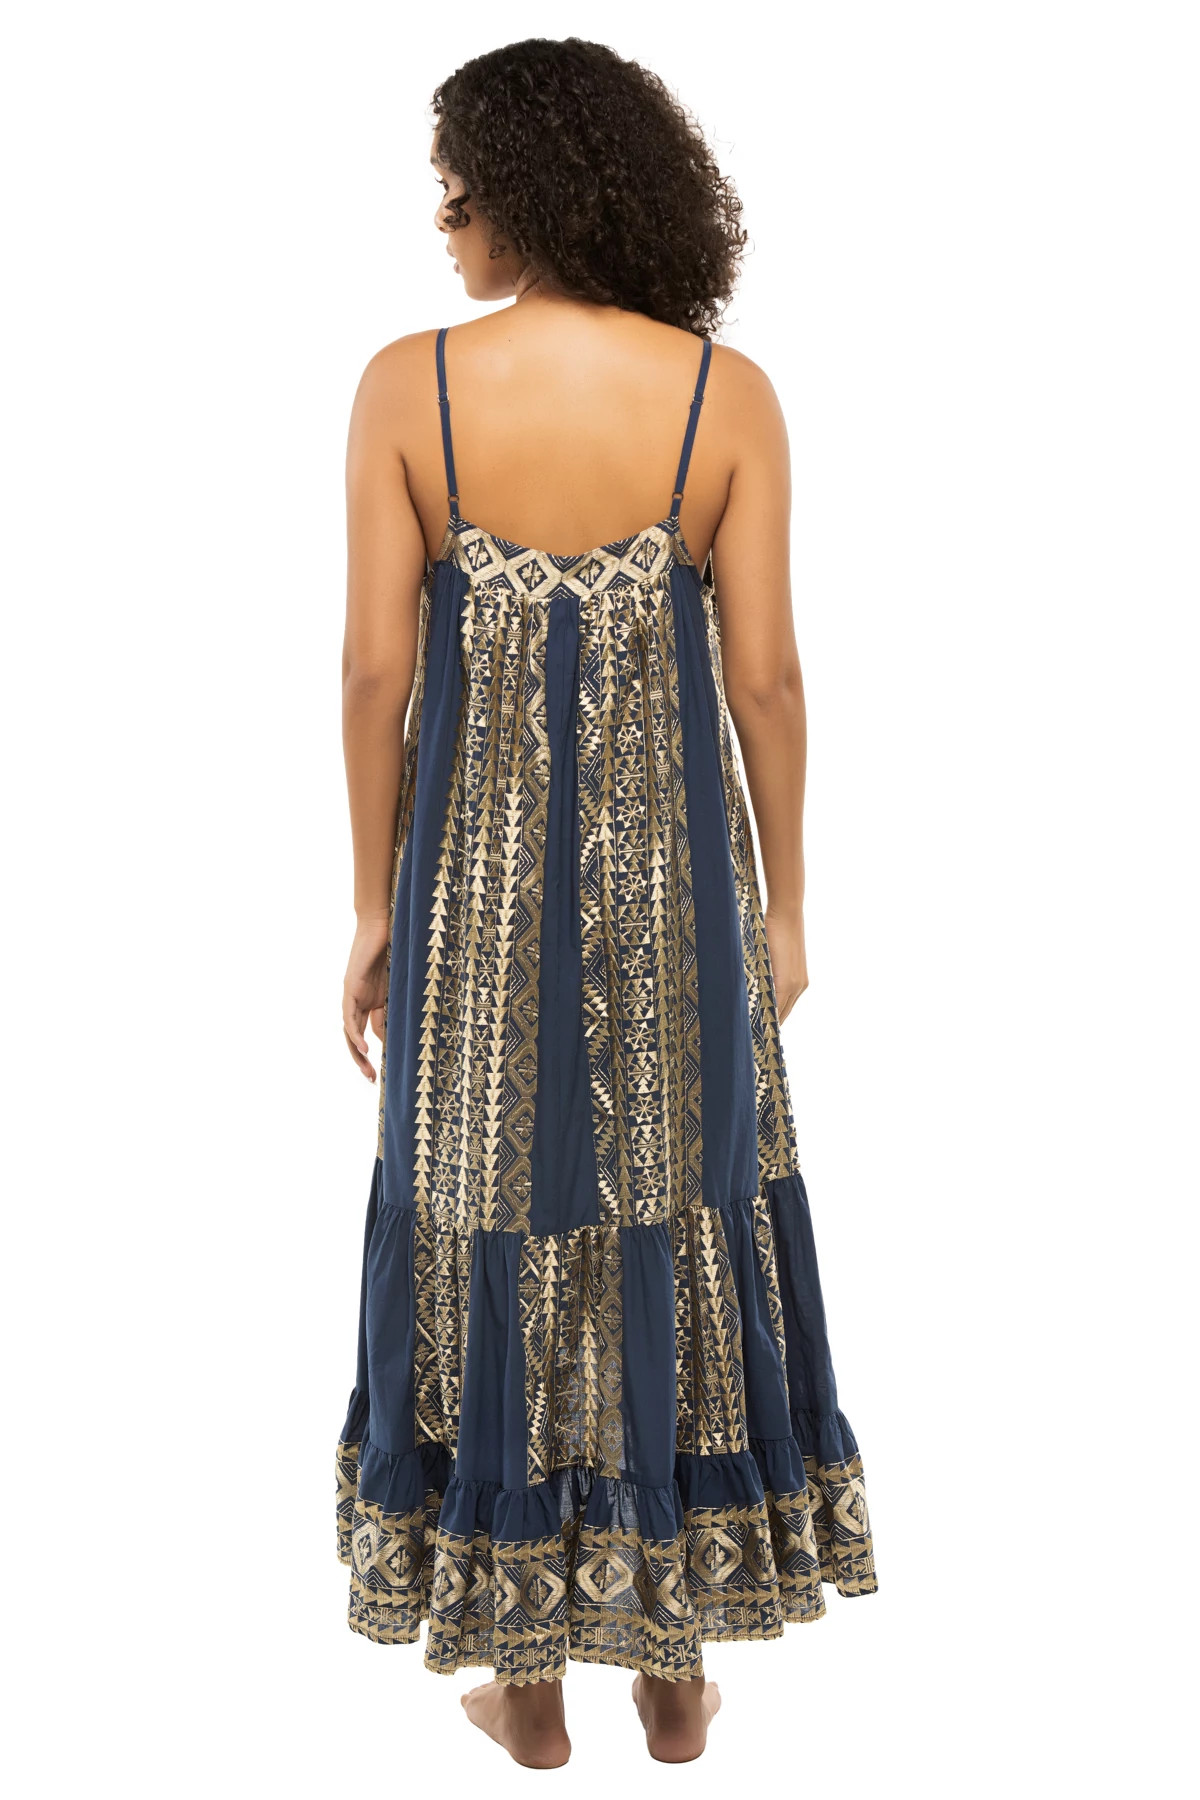 NAVY BLUE GOLD Embroidered Metallic Midi Dress image number 2